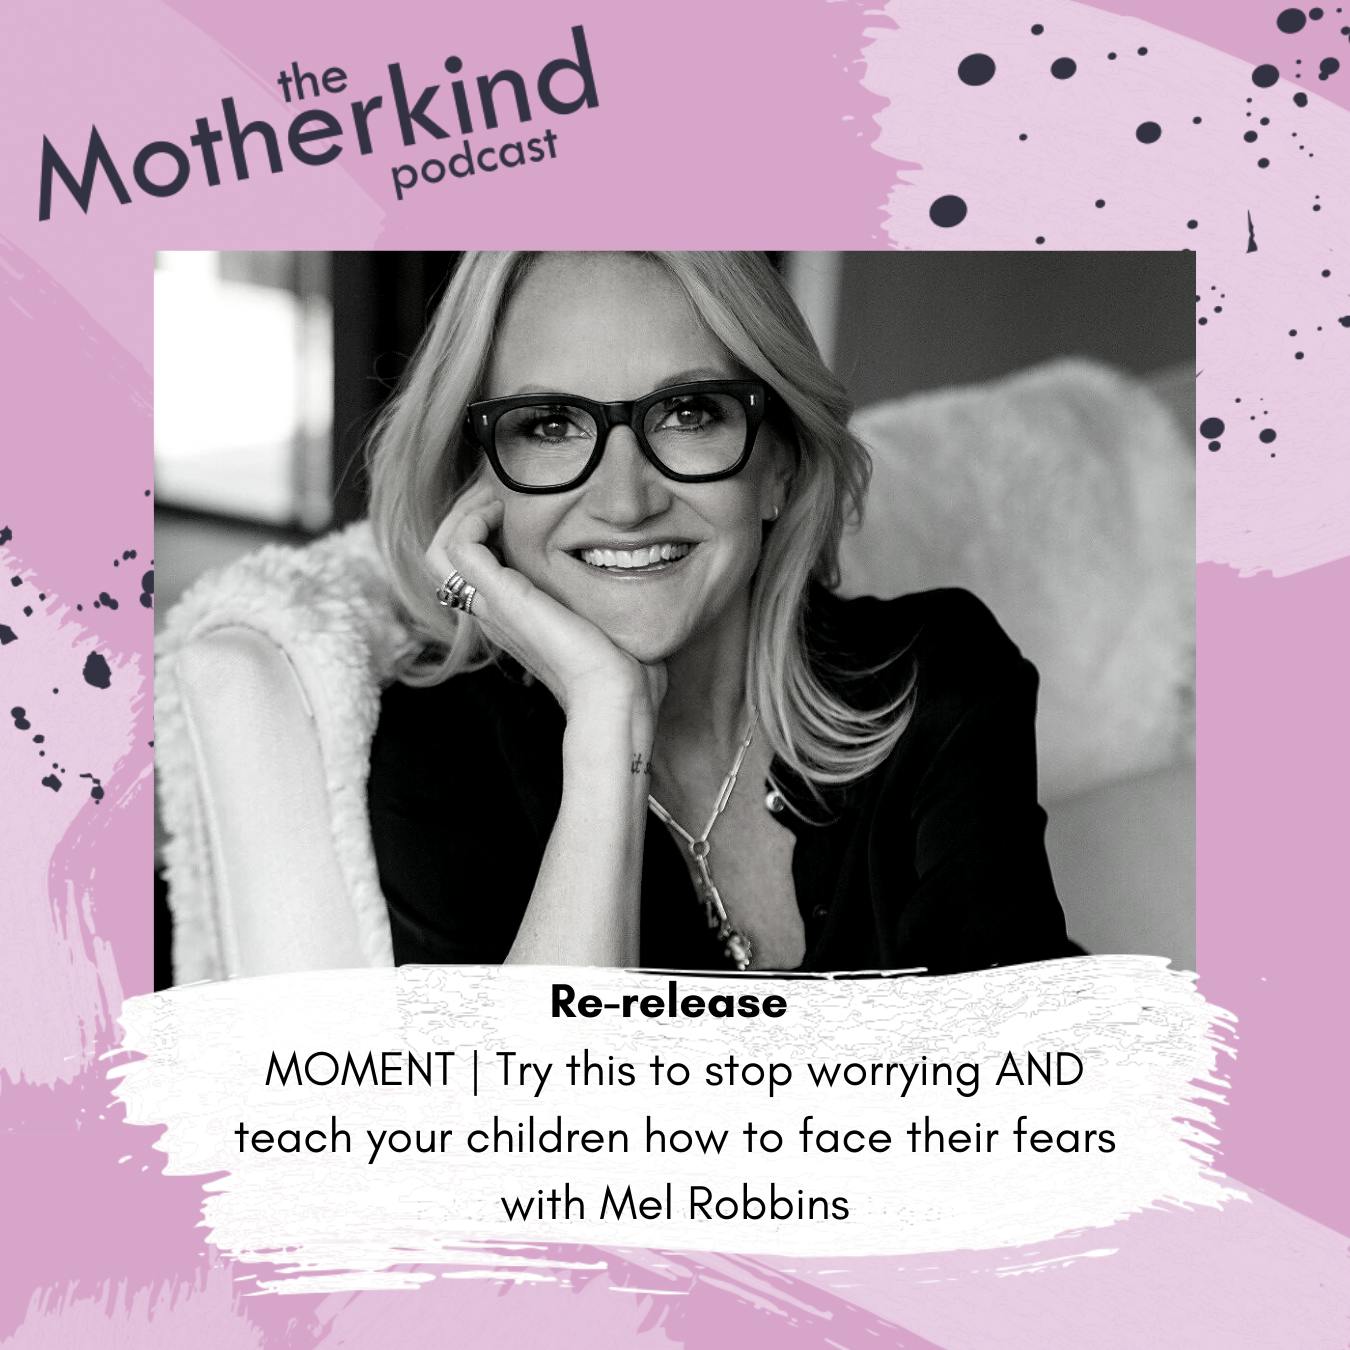 Re-release MOMENT | Try this to stop worrying AND teach your children how to face their fears with Mel Robbins